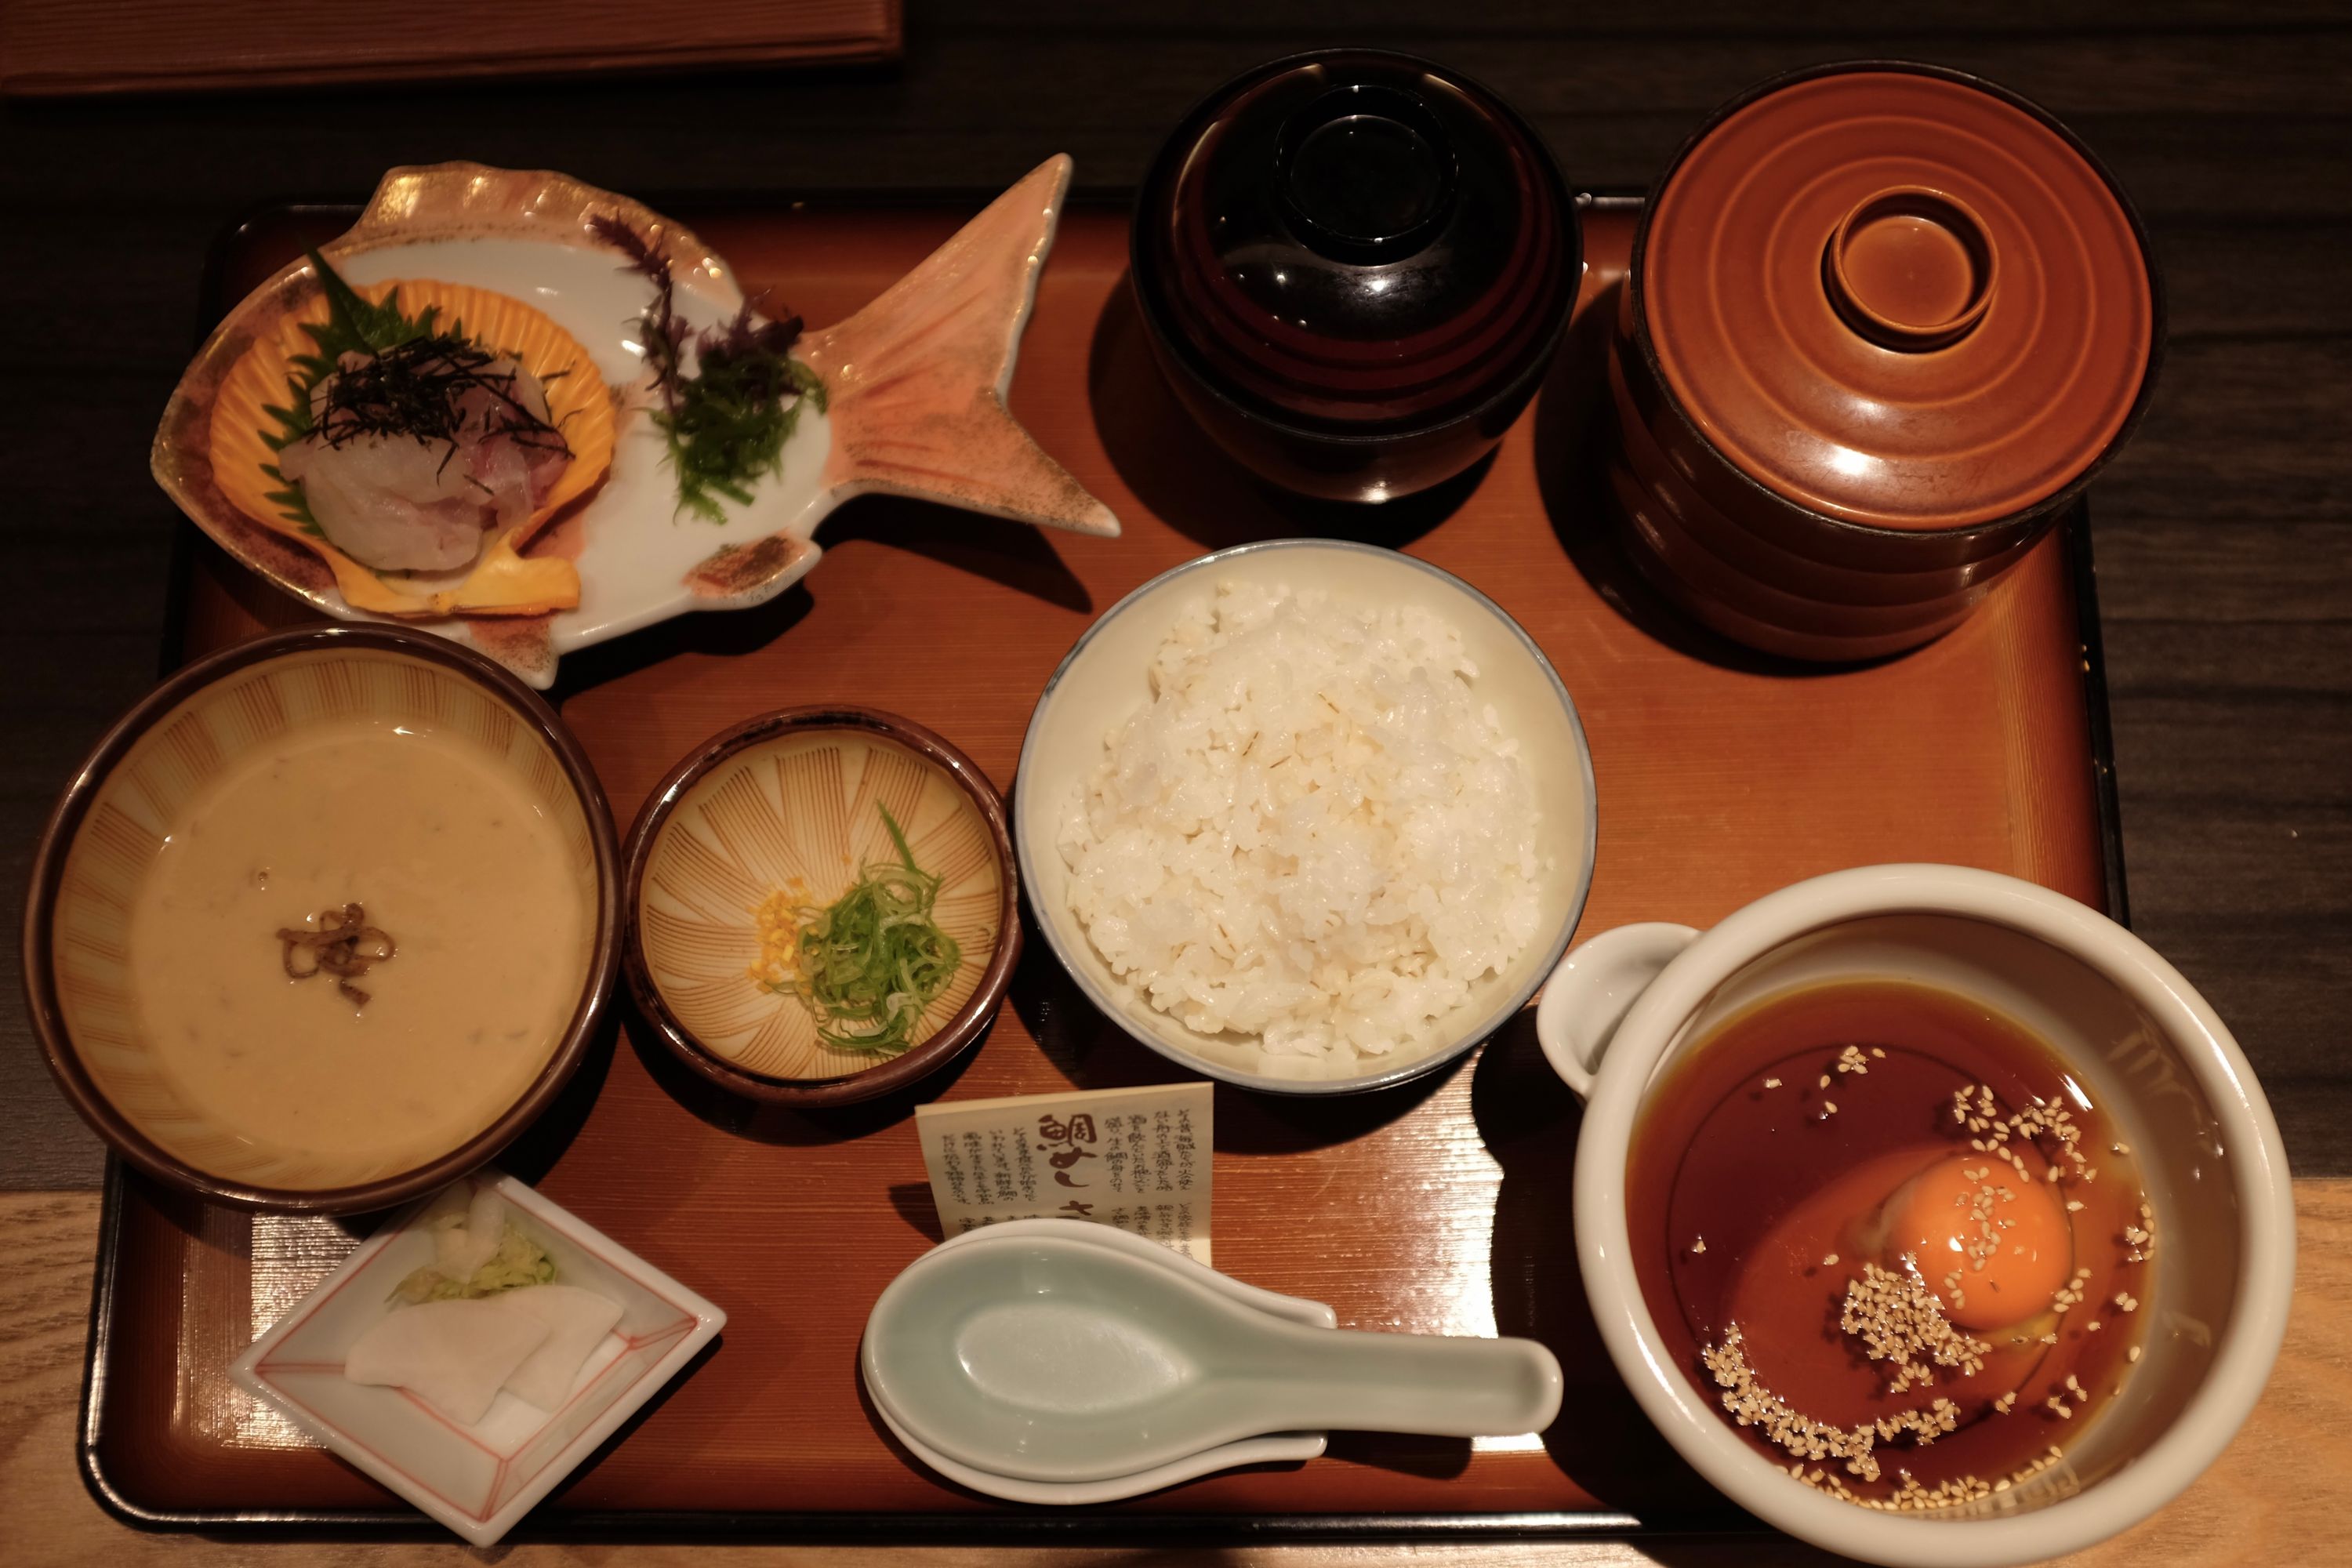 A beautifully presented set meal of sea bream, rice, miso soup, and various small plates.